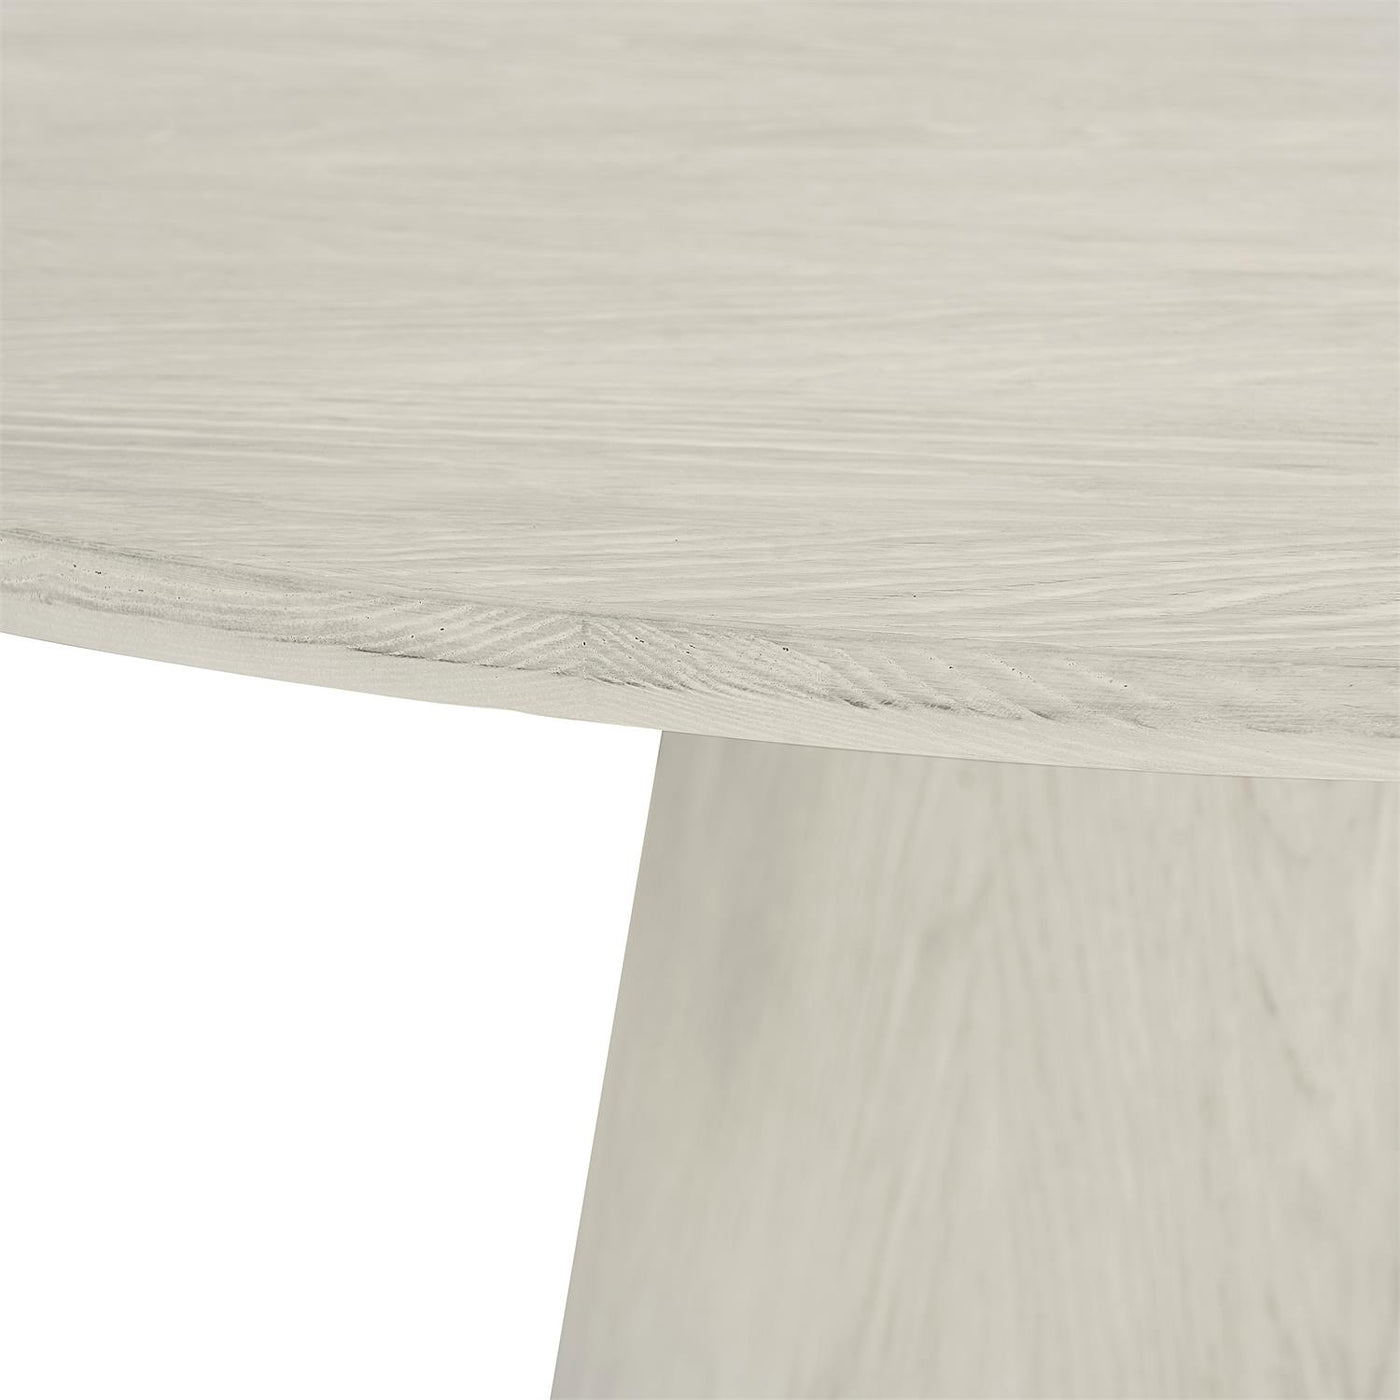 TABLE DINING ROUND WHITE OAK